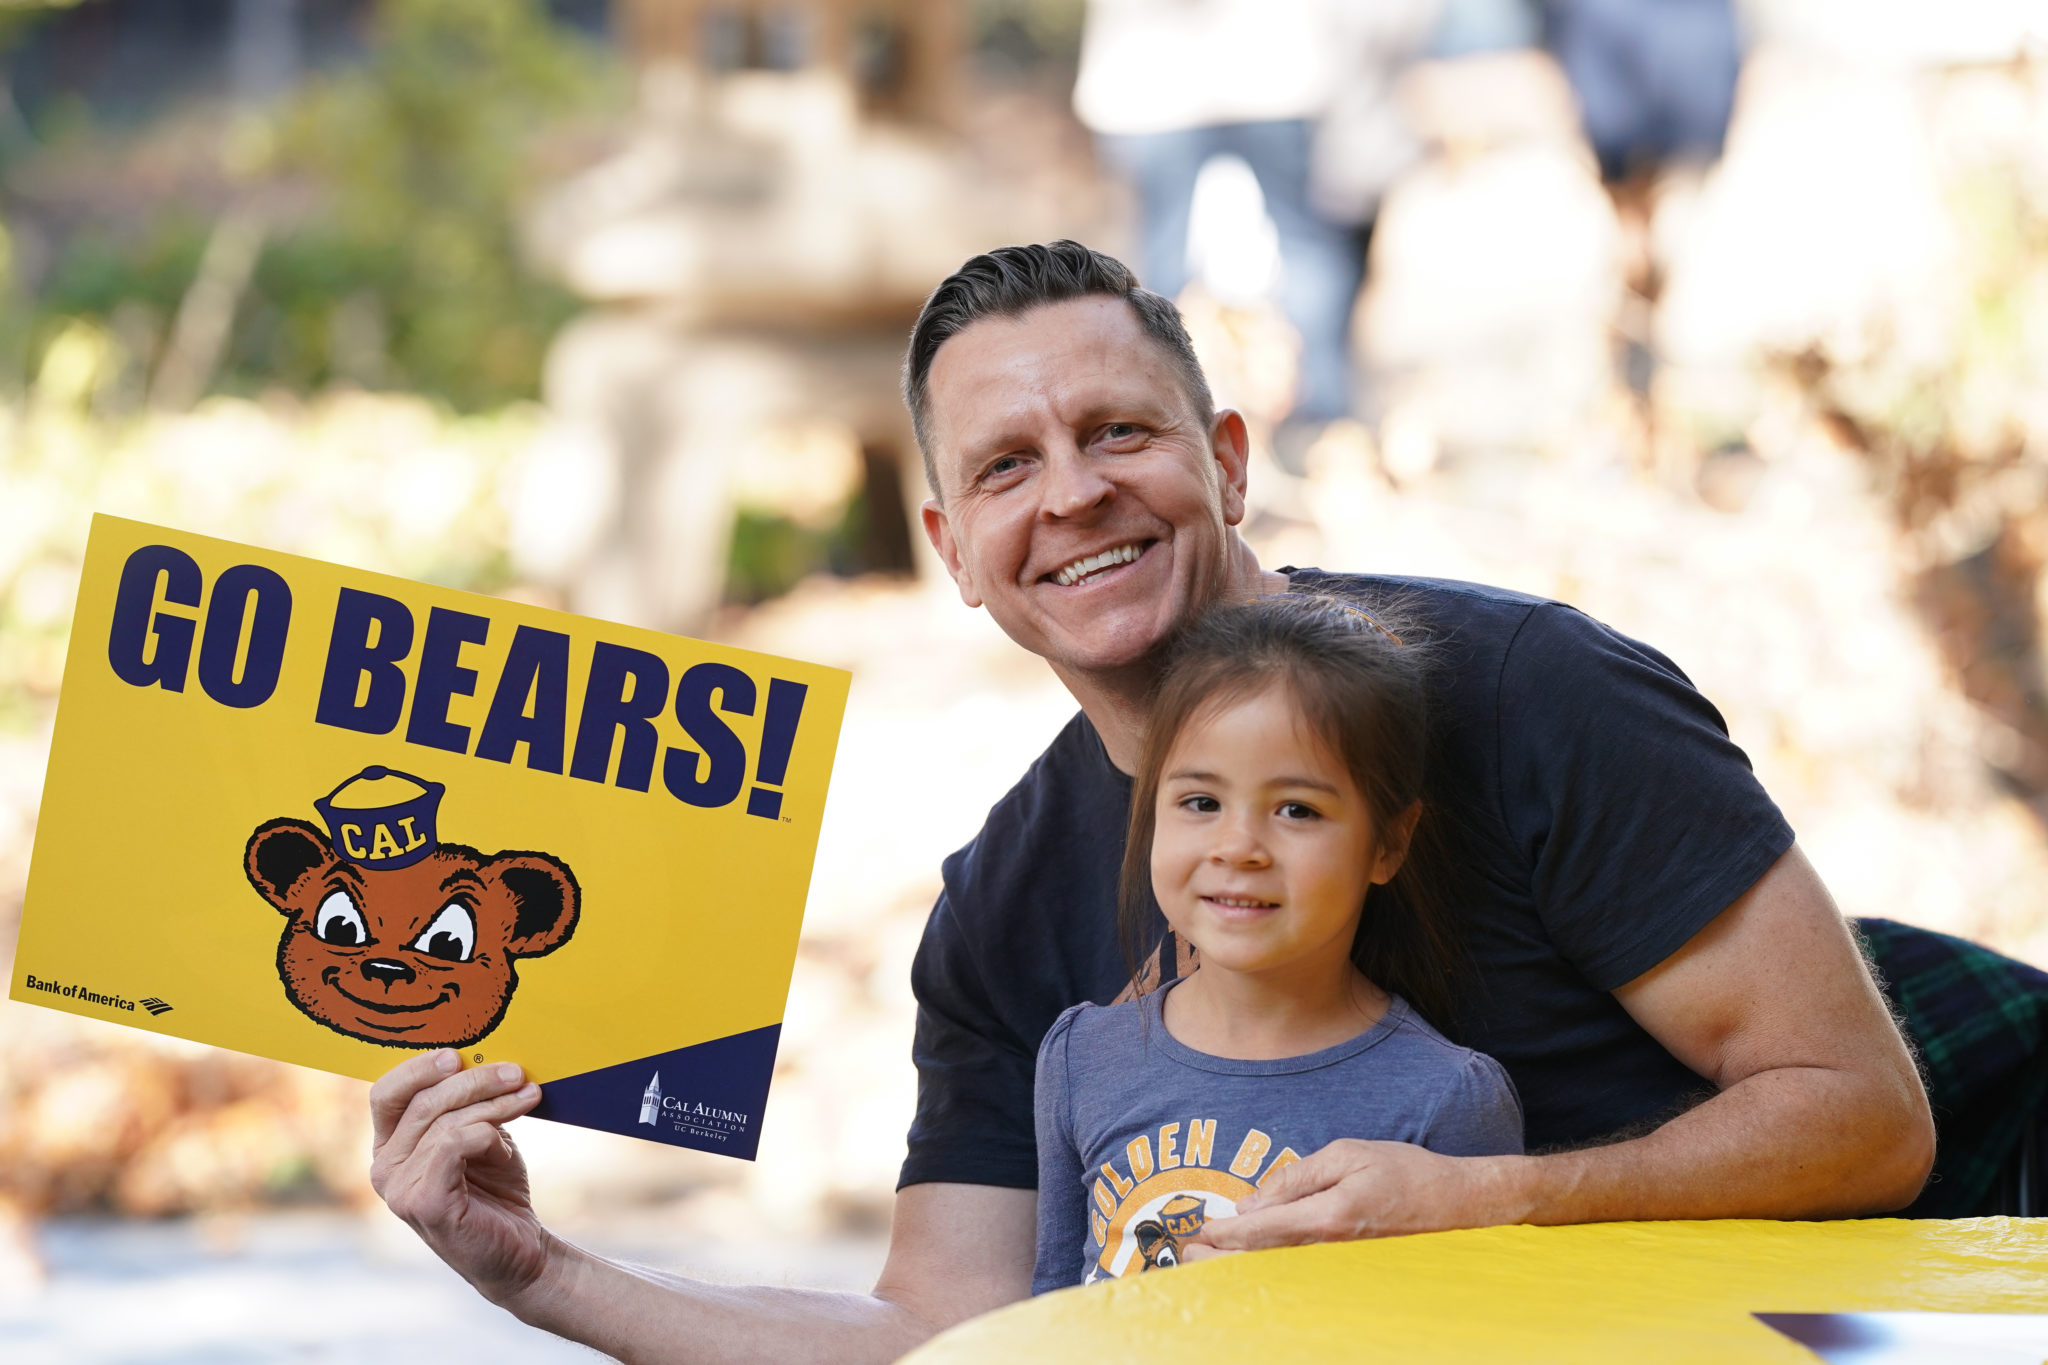 Man with young child holding Go Bears sign